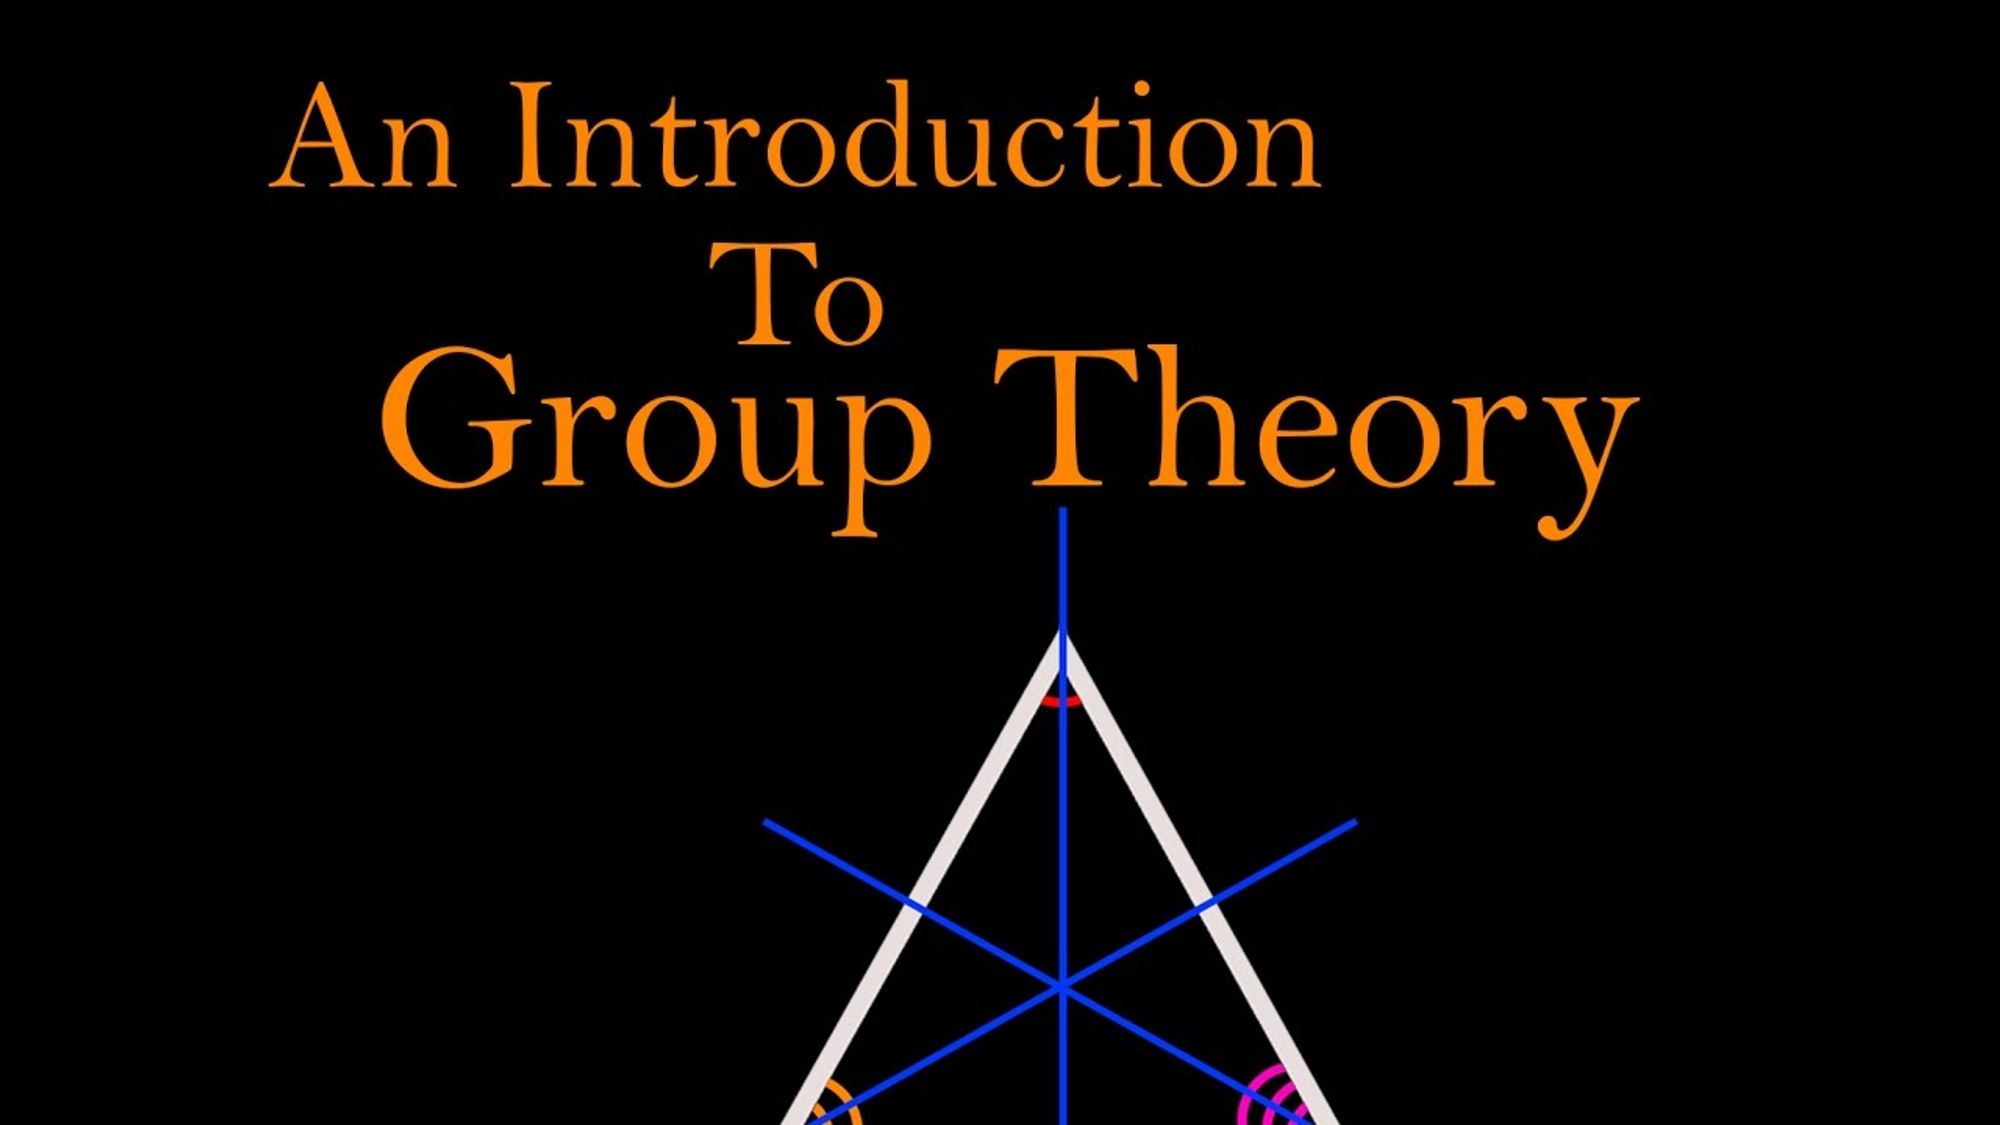 An Introduction To Group Theory